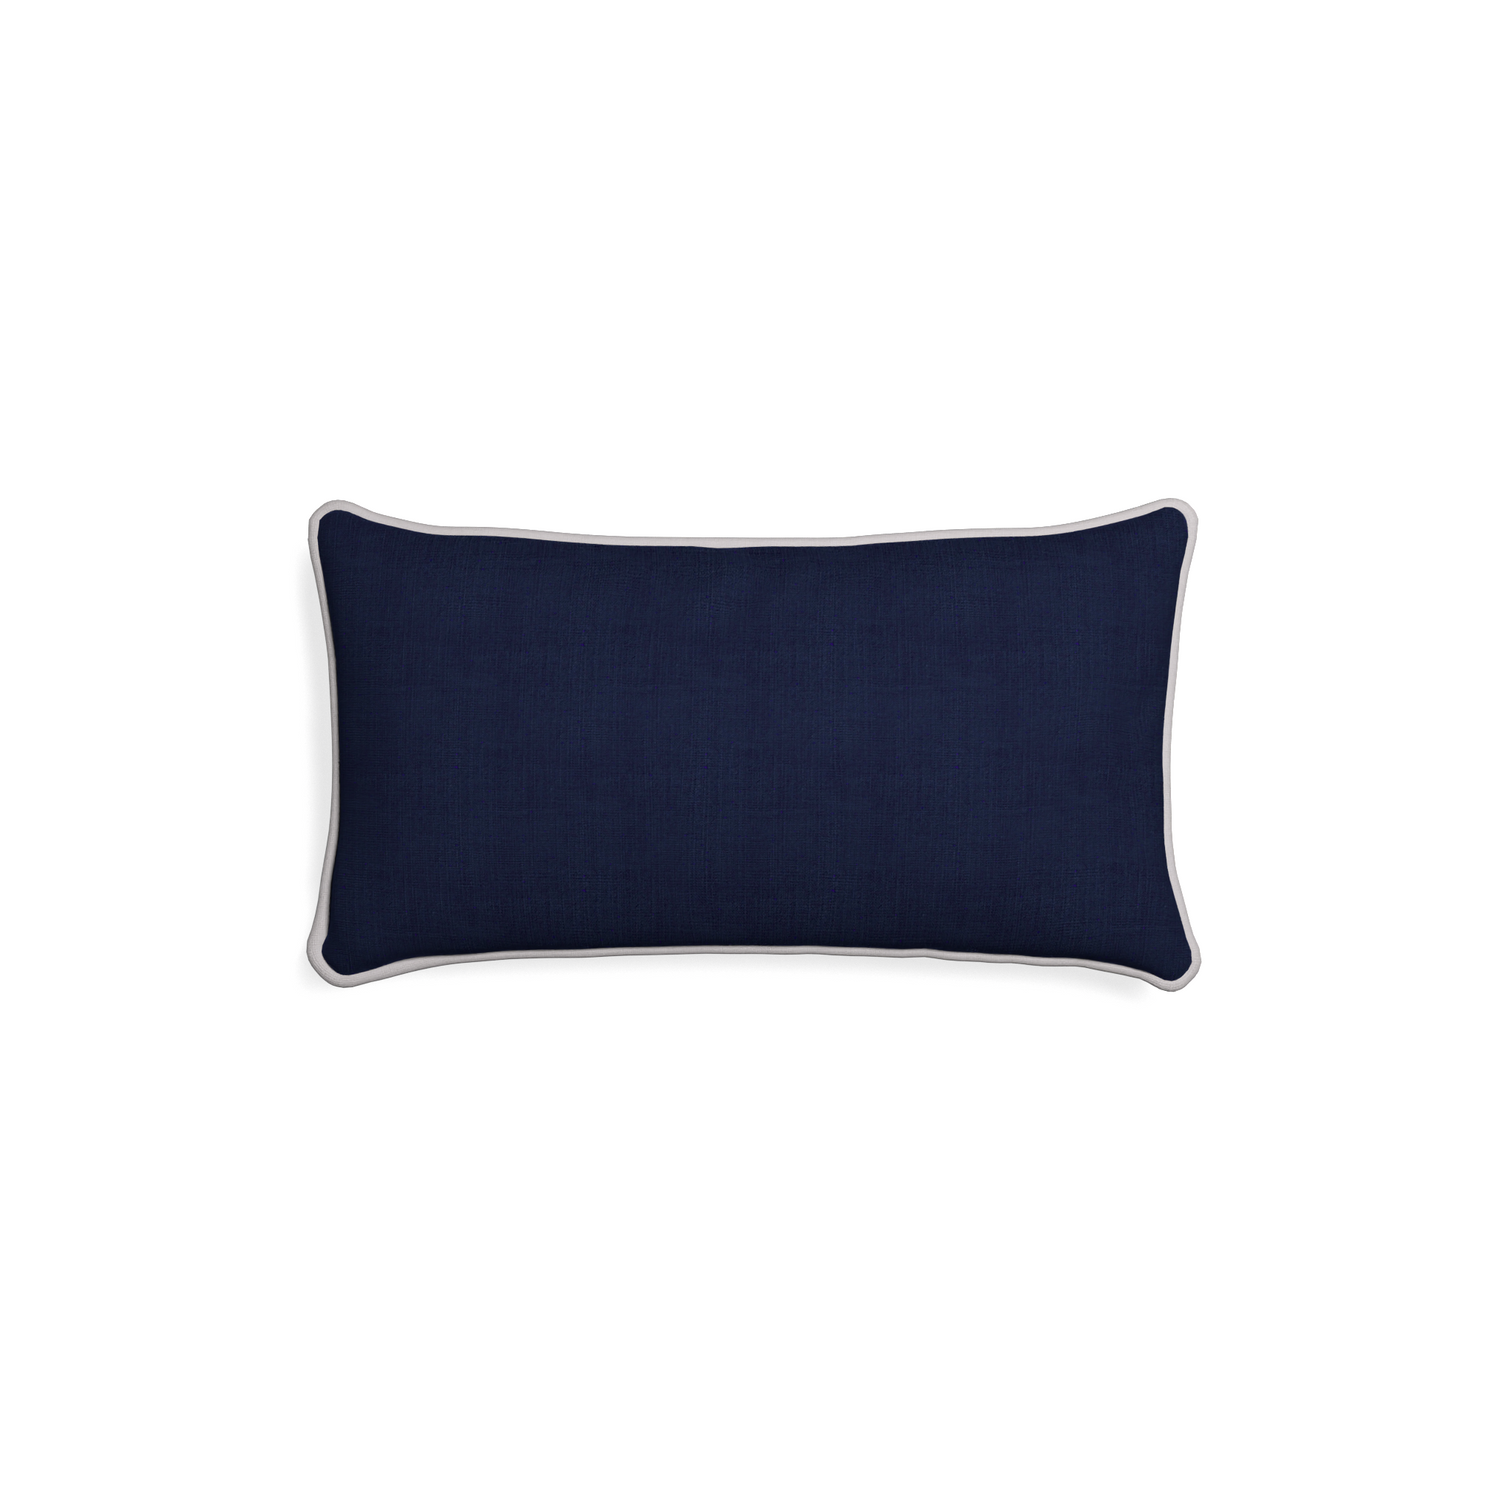 Petite-lumbar midnight custom navy bluepillow with pebble piping on white background